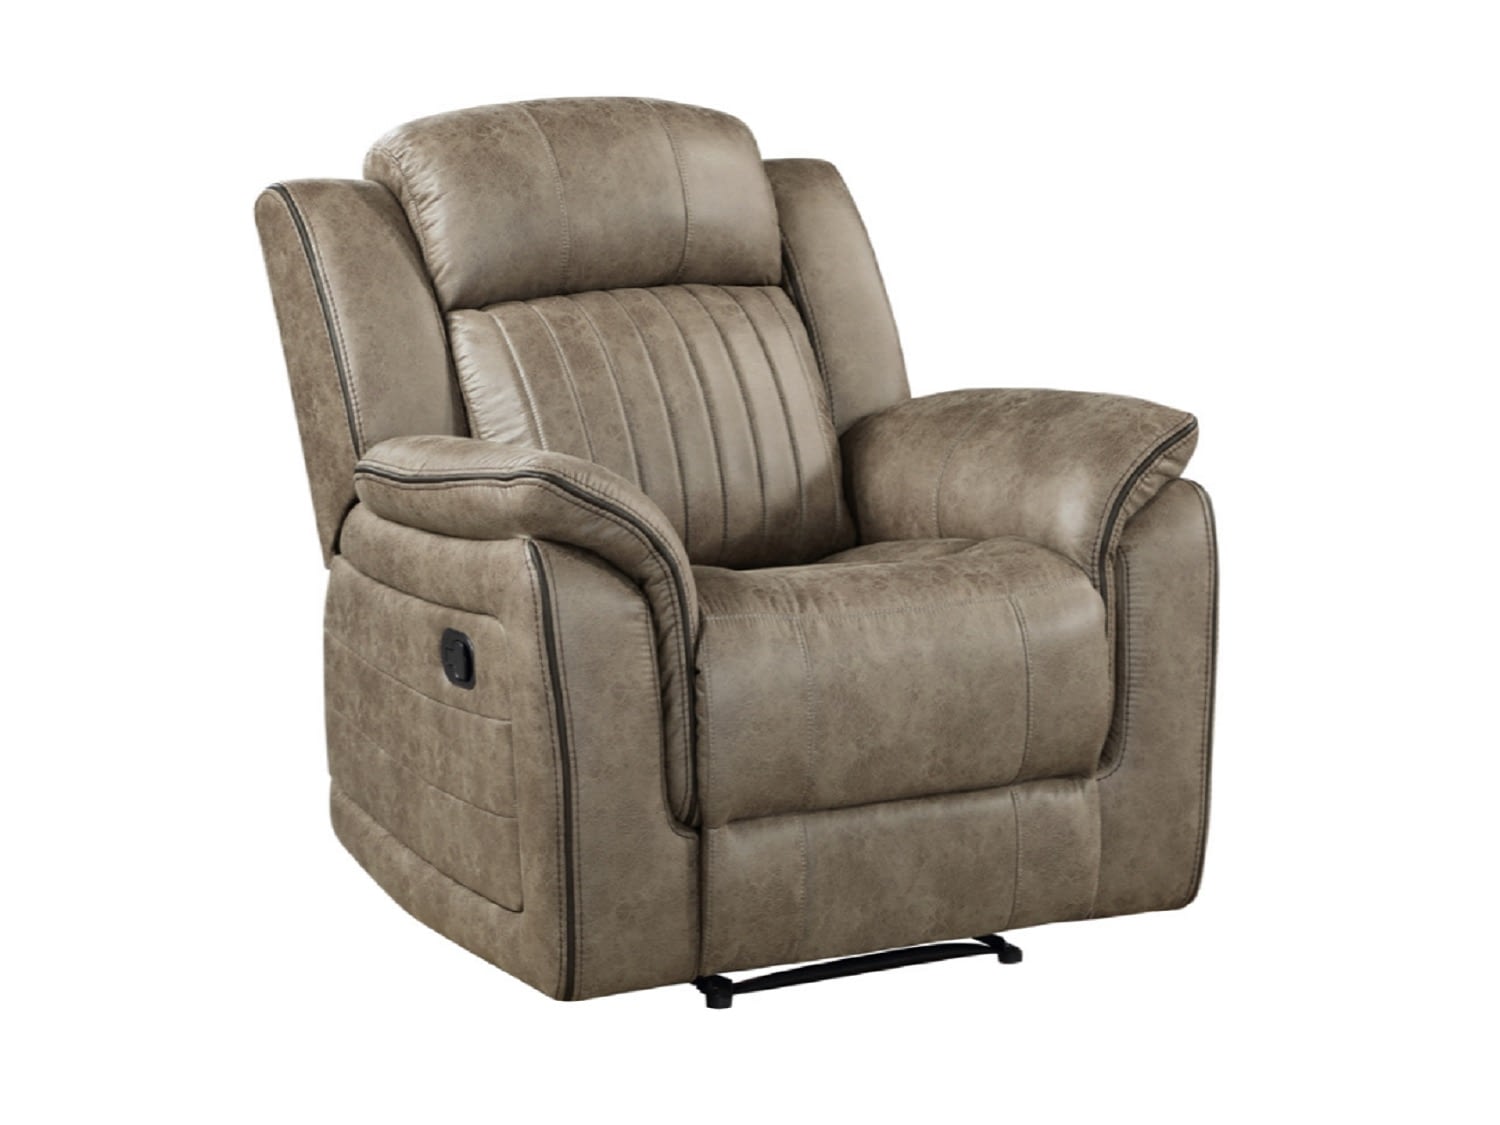 FERNLY Recliner Chair - Side